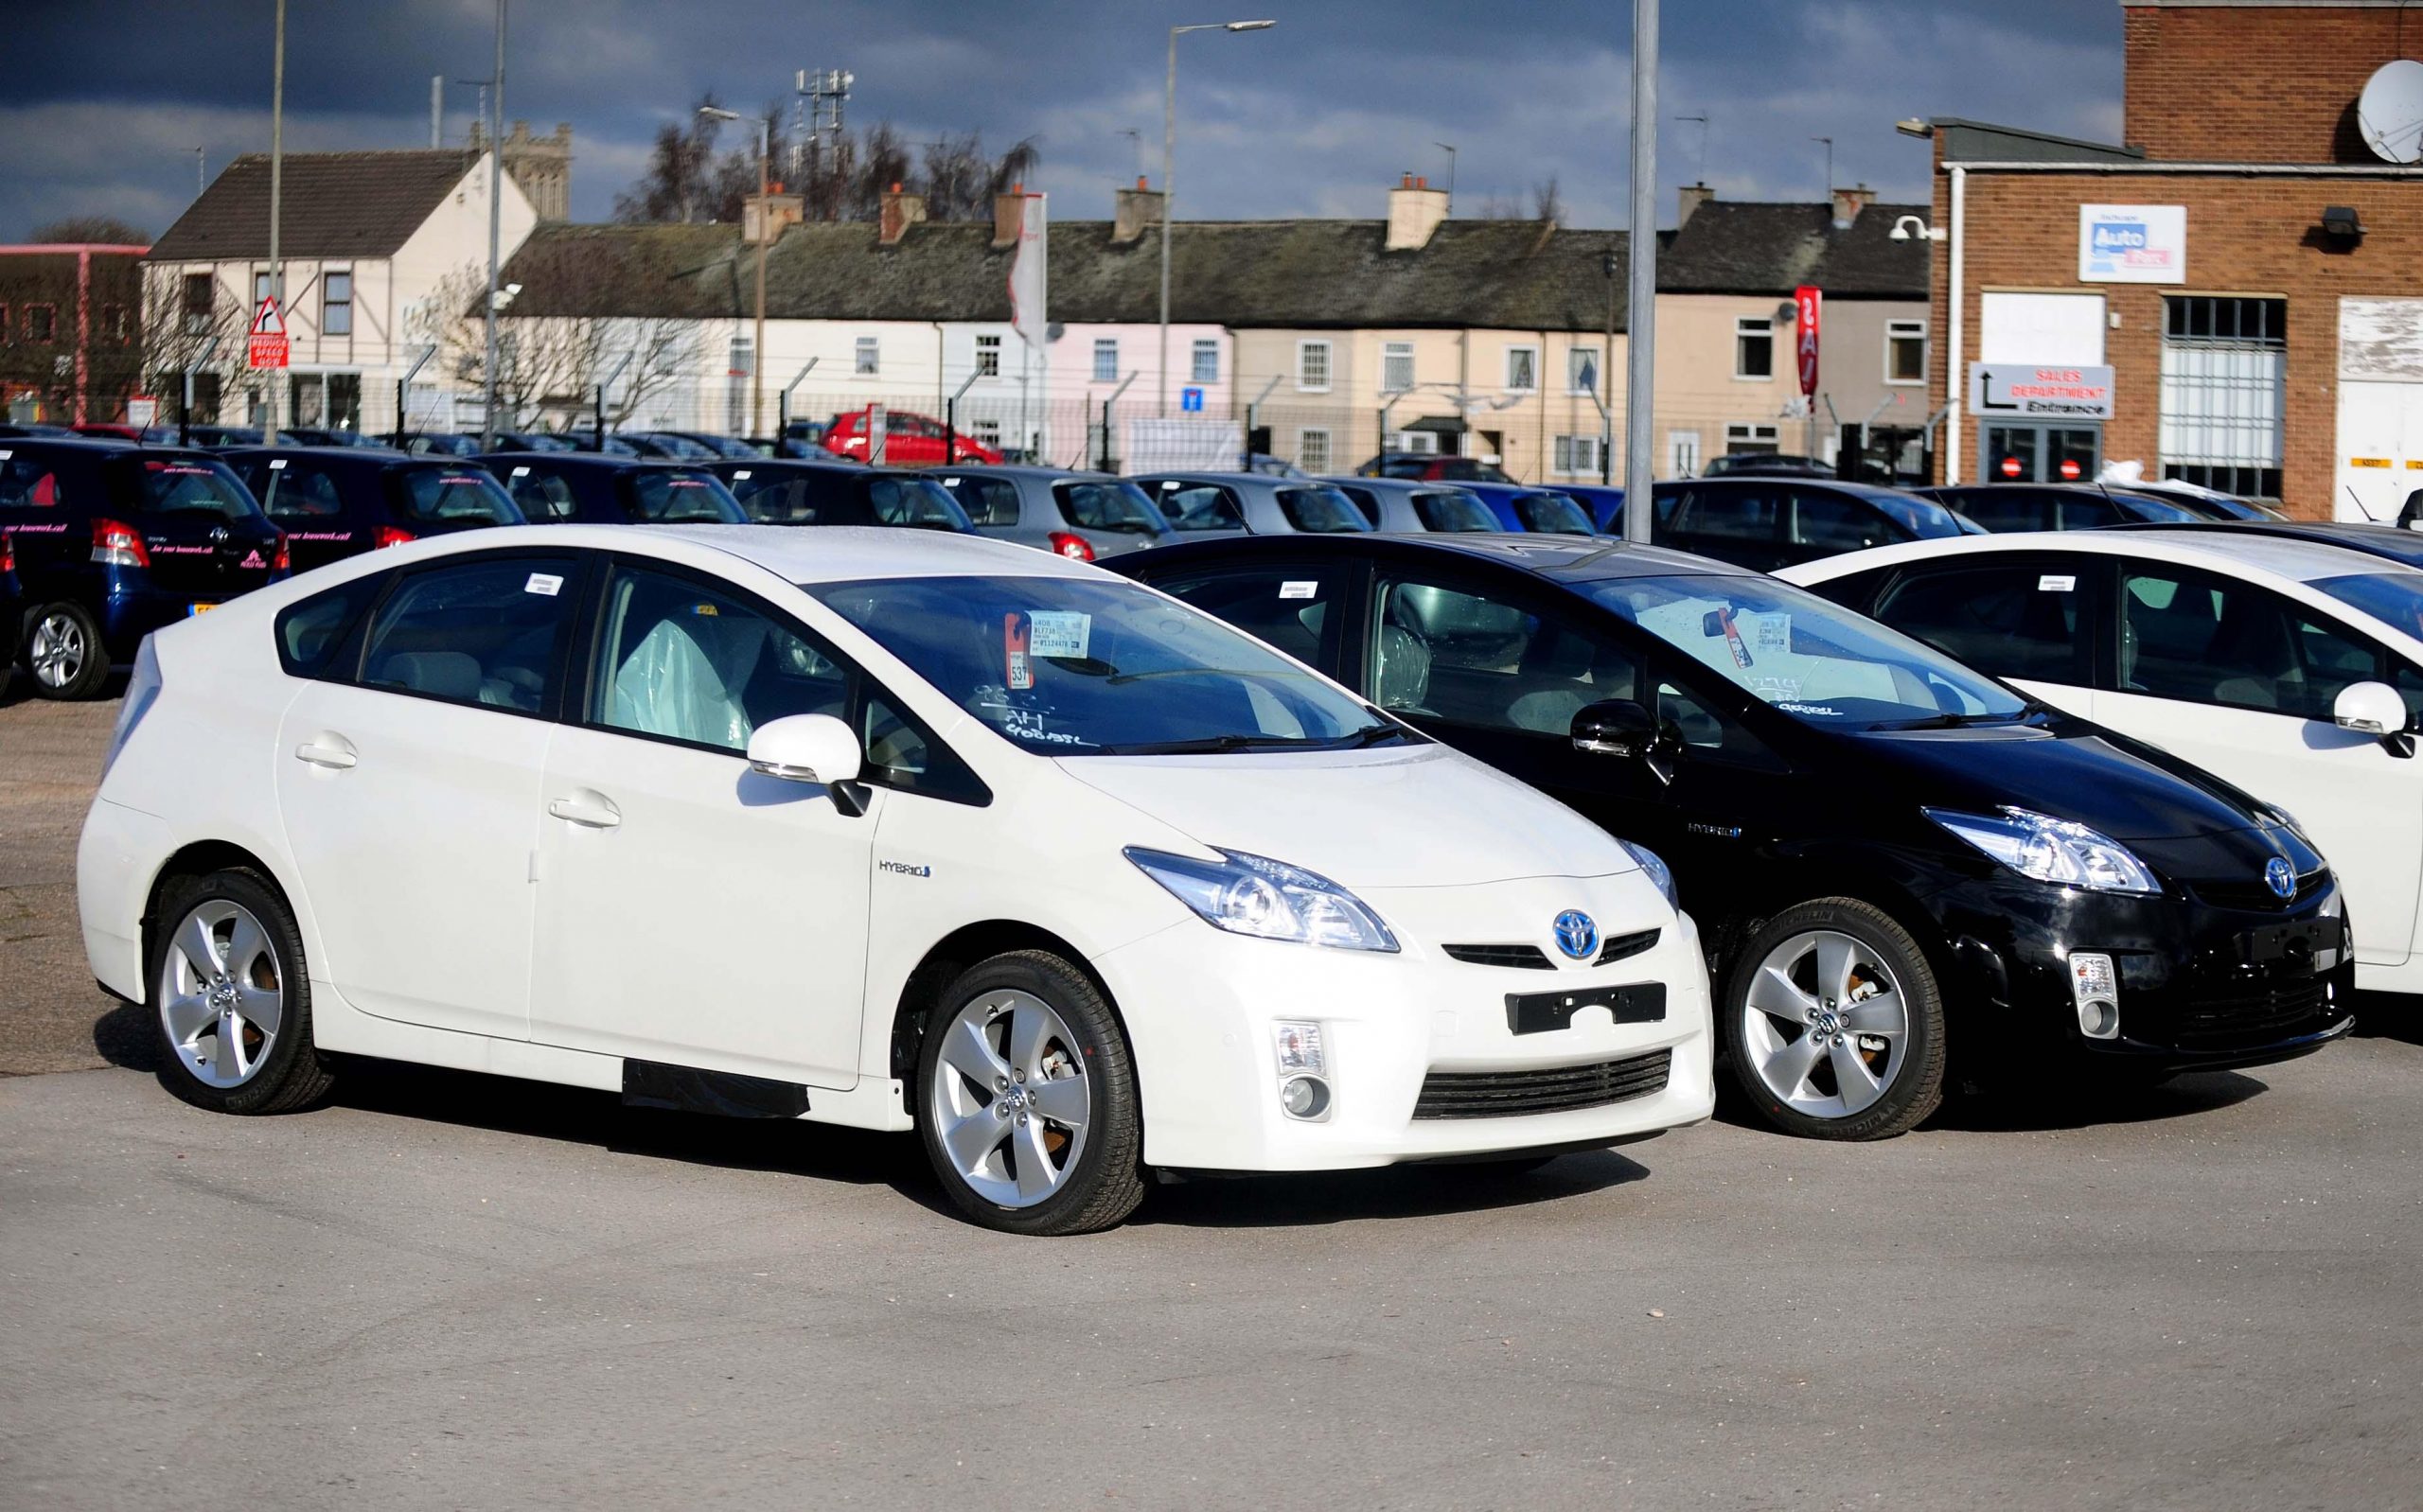 2010 Toyota Prius model parked in a parking lot ready for sale